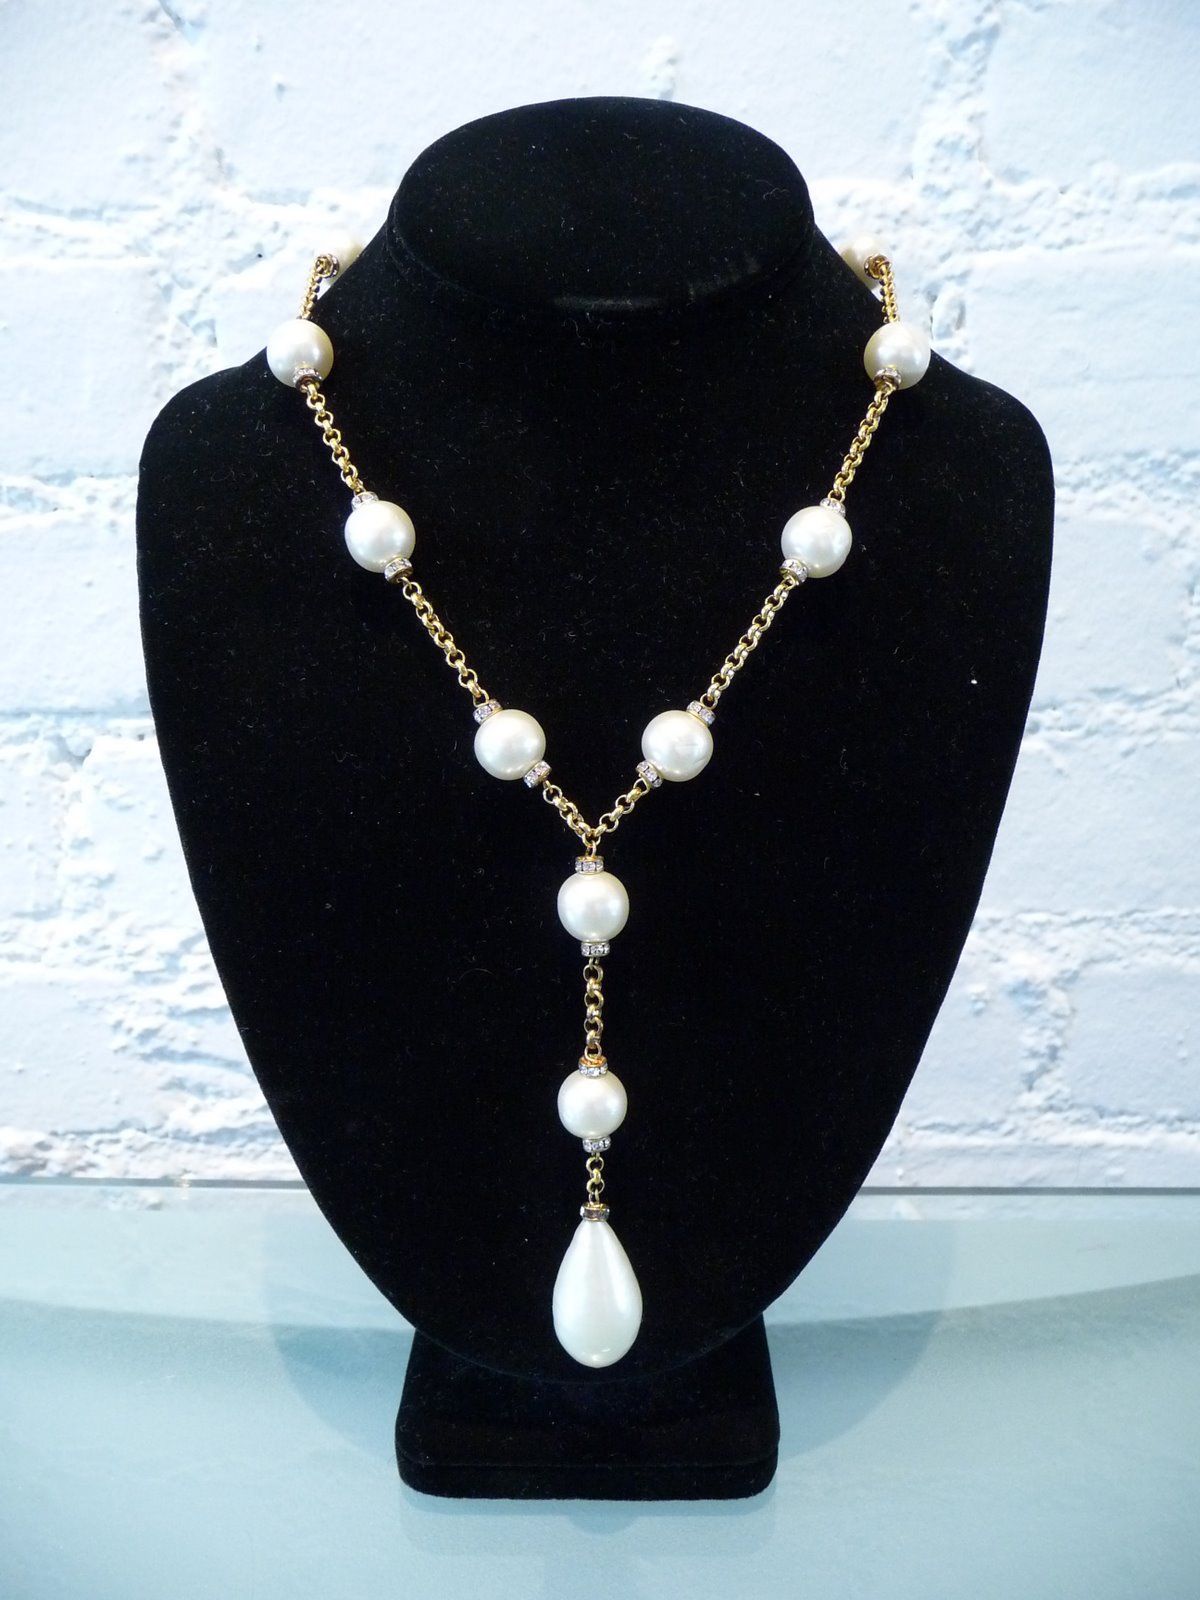 [CHANEL+PEARLS+WITH+CRYSTAL+TRIM+AND+LARGE+DROP+28+INCH+CHAIN+WITH+4+INCH+DROP.JPG+(1).JPG]